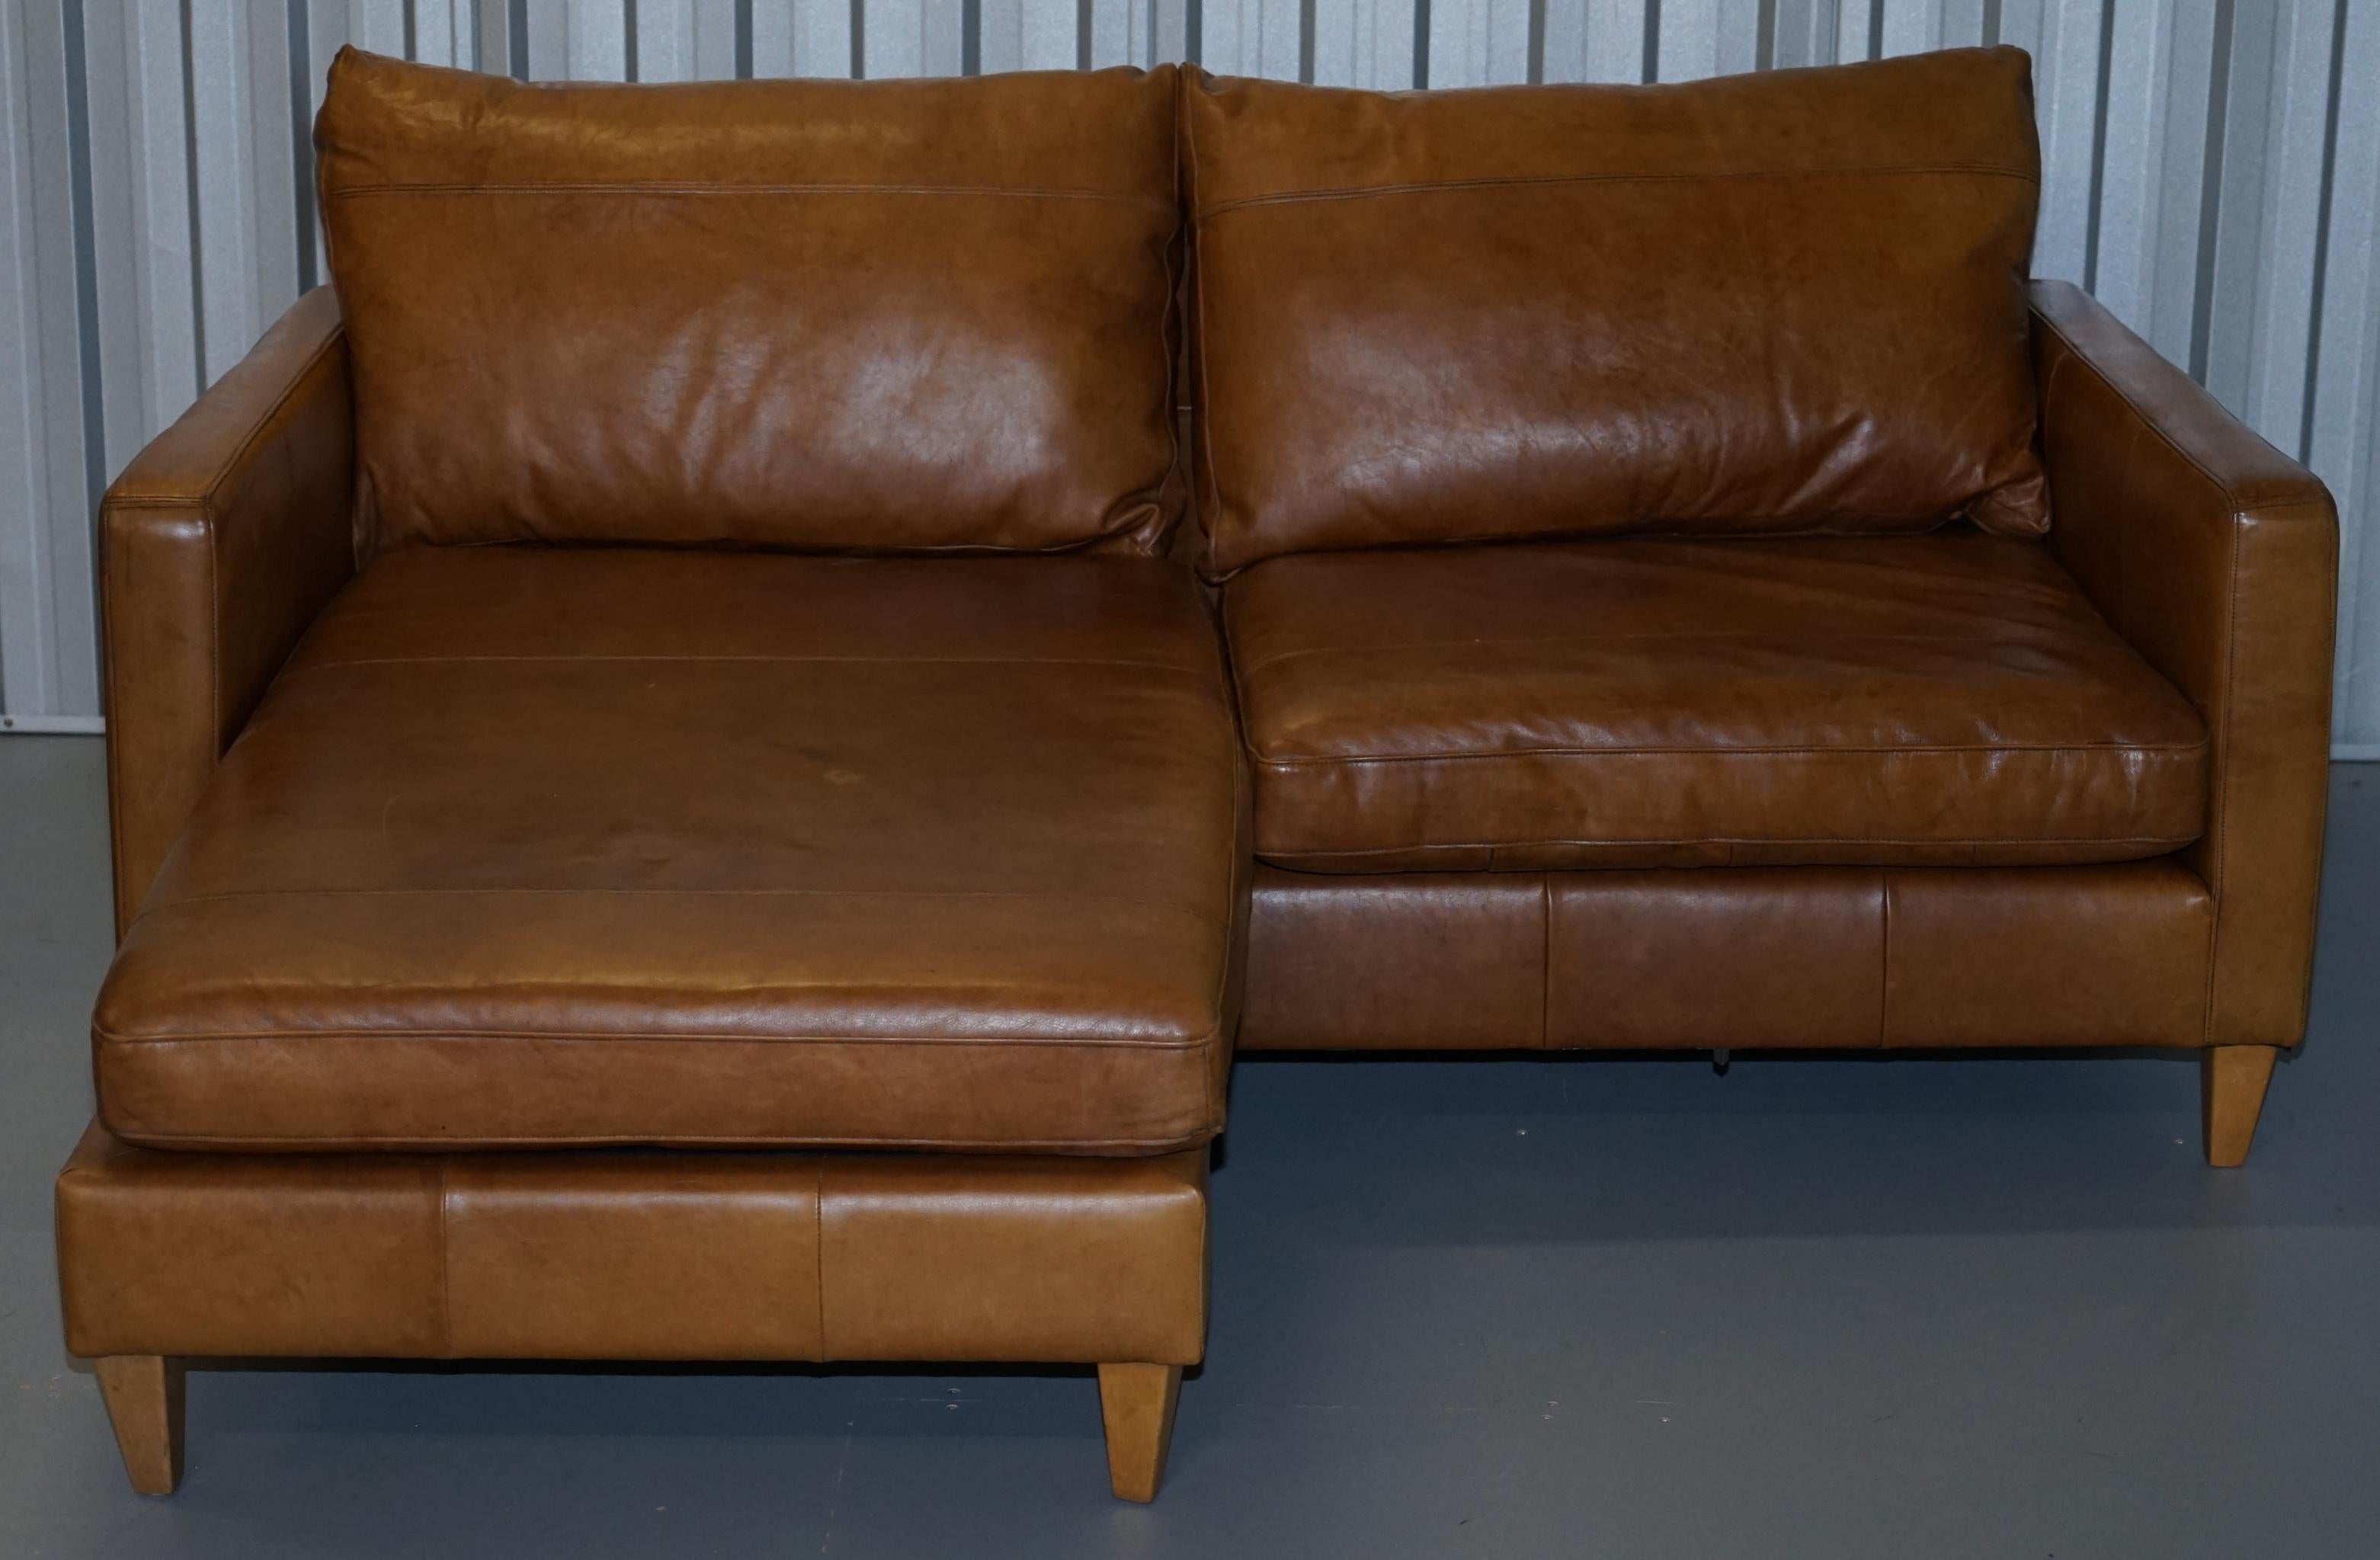 Tan Leather Corner 2-Seat Sofa or Sofa Chaise Changeable Footstool Swap Sides 4